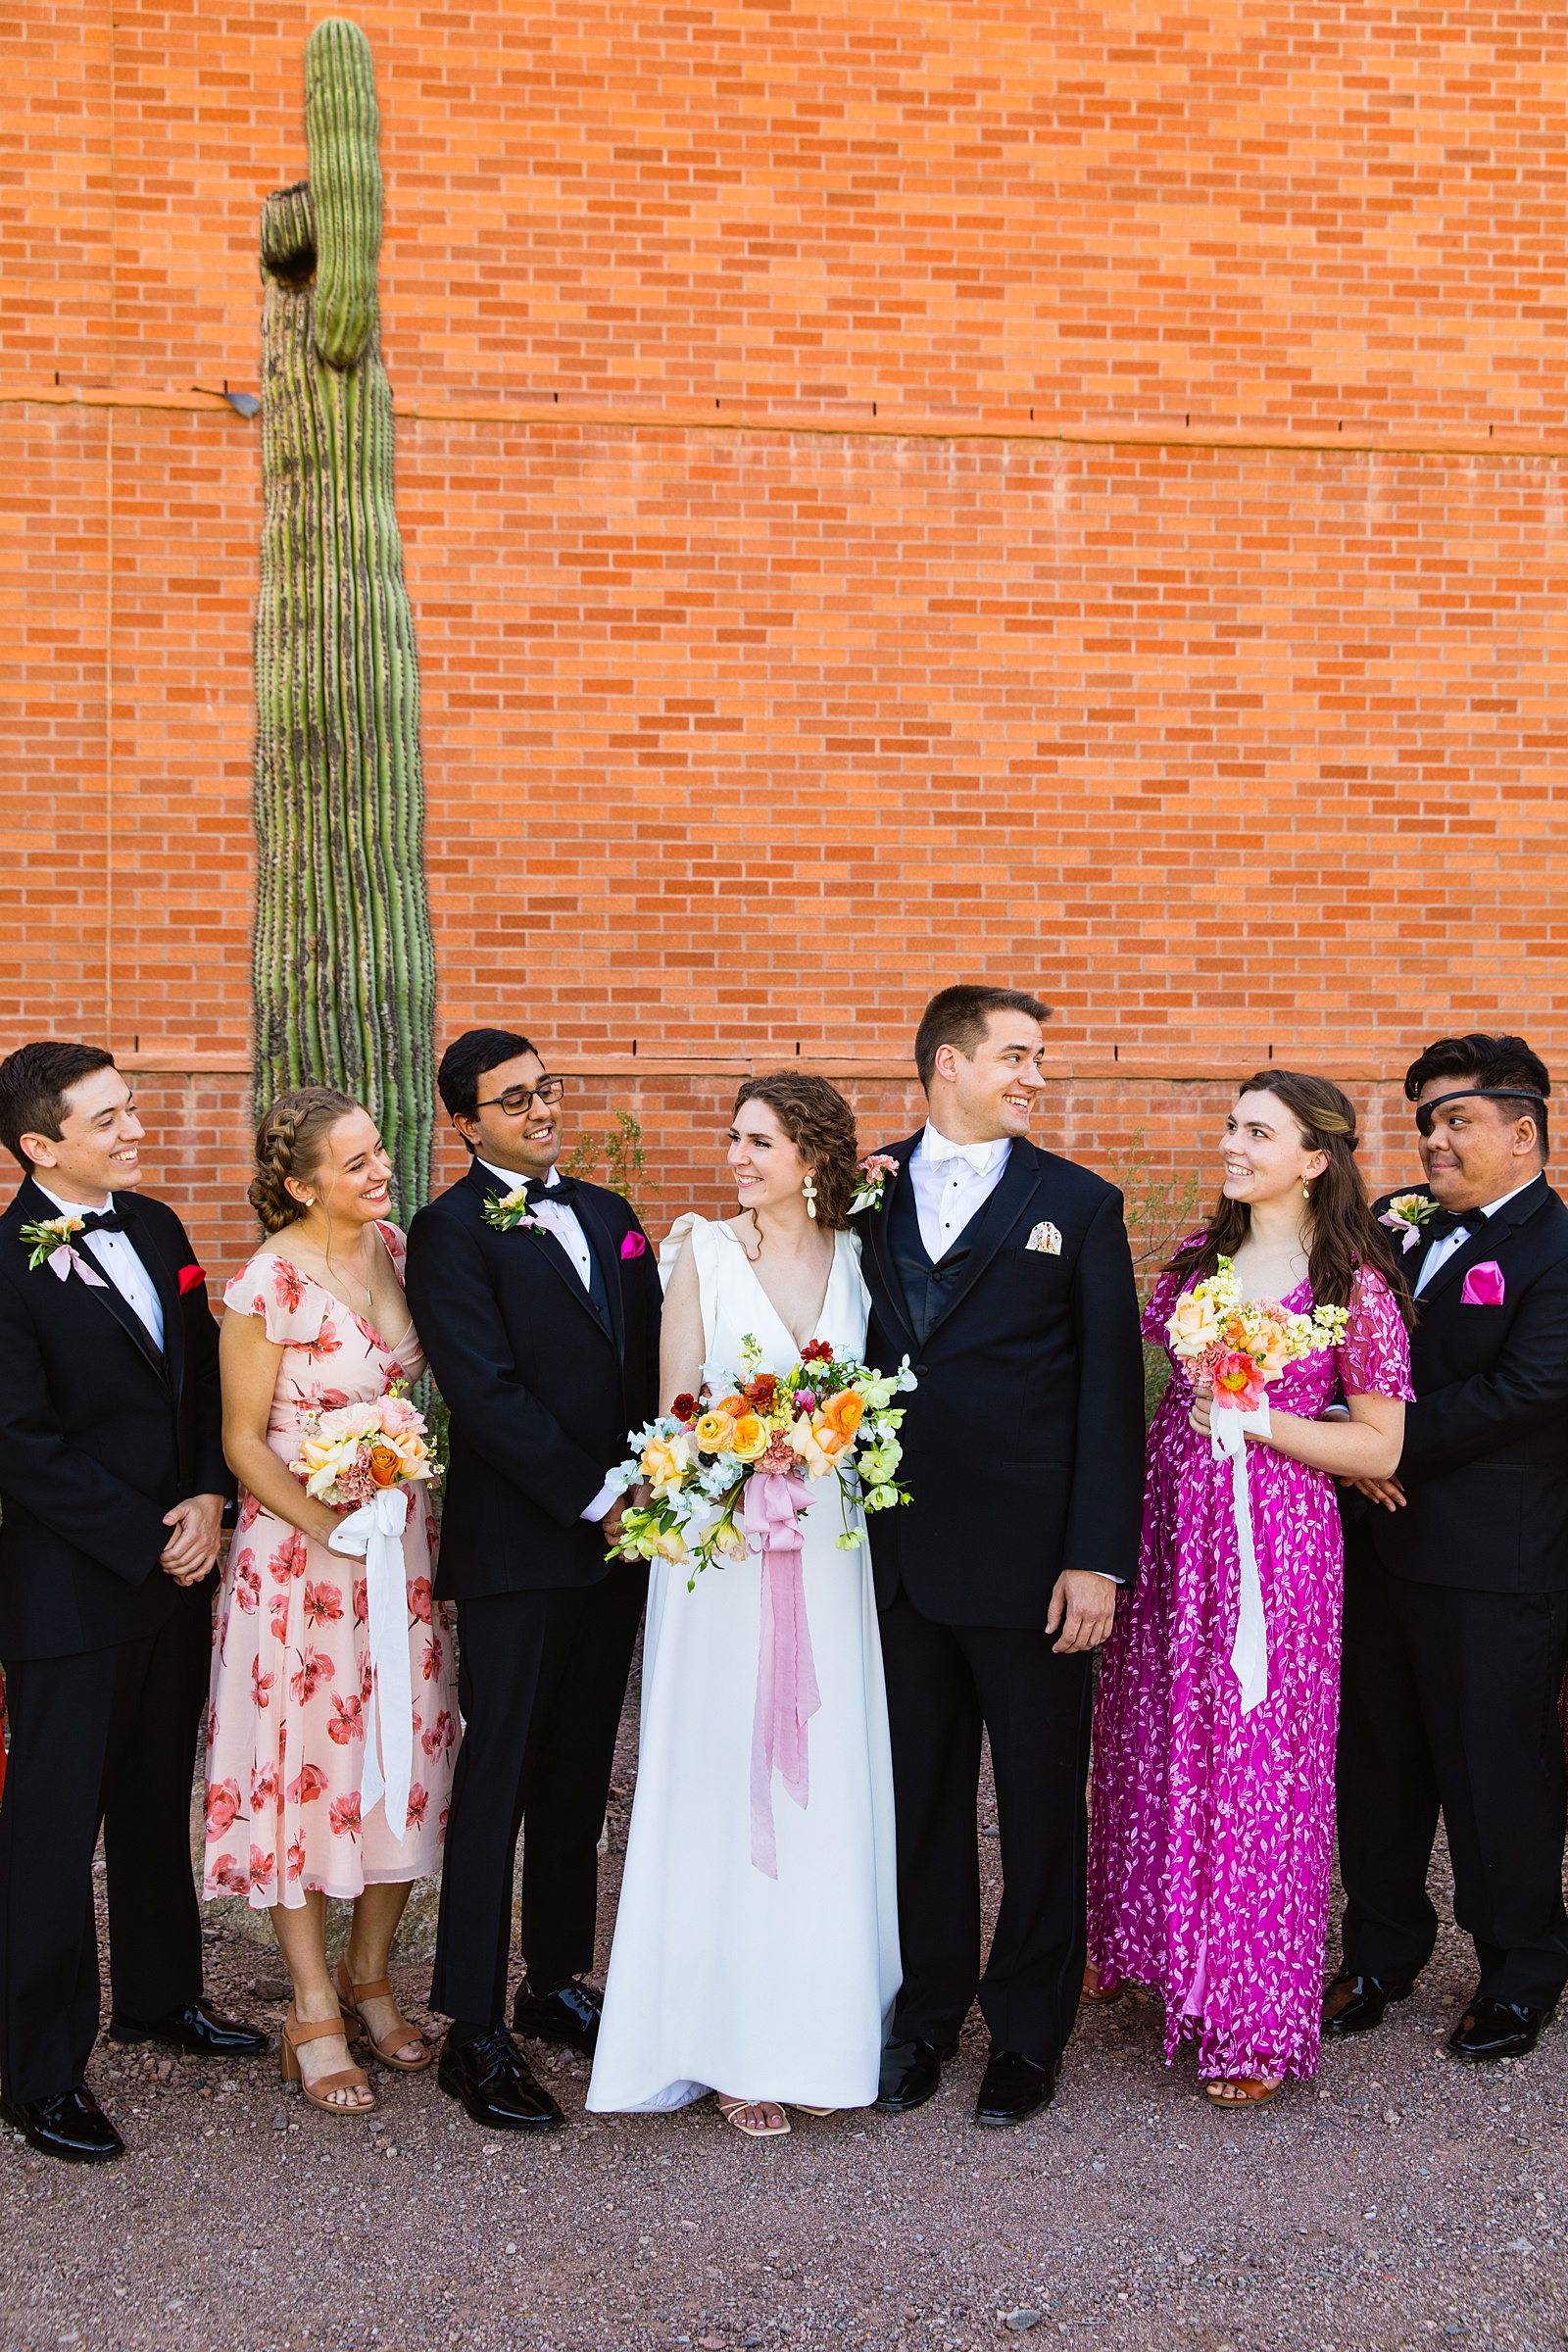 Mixed gender bridal party laughing together at Arizona Historical Society wedding by Tempe wedding photographer PMA Photography.